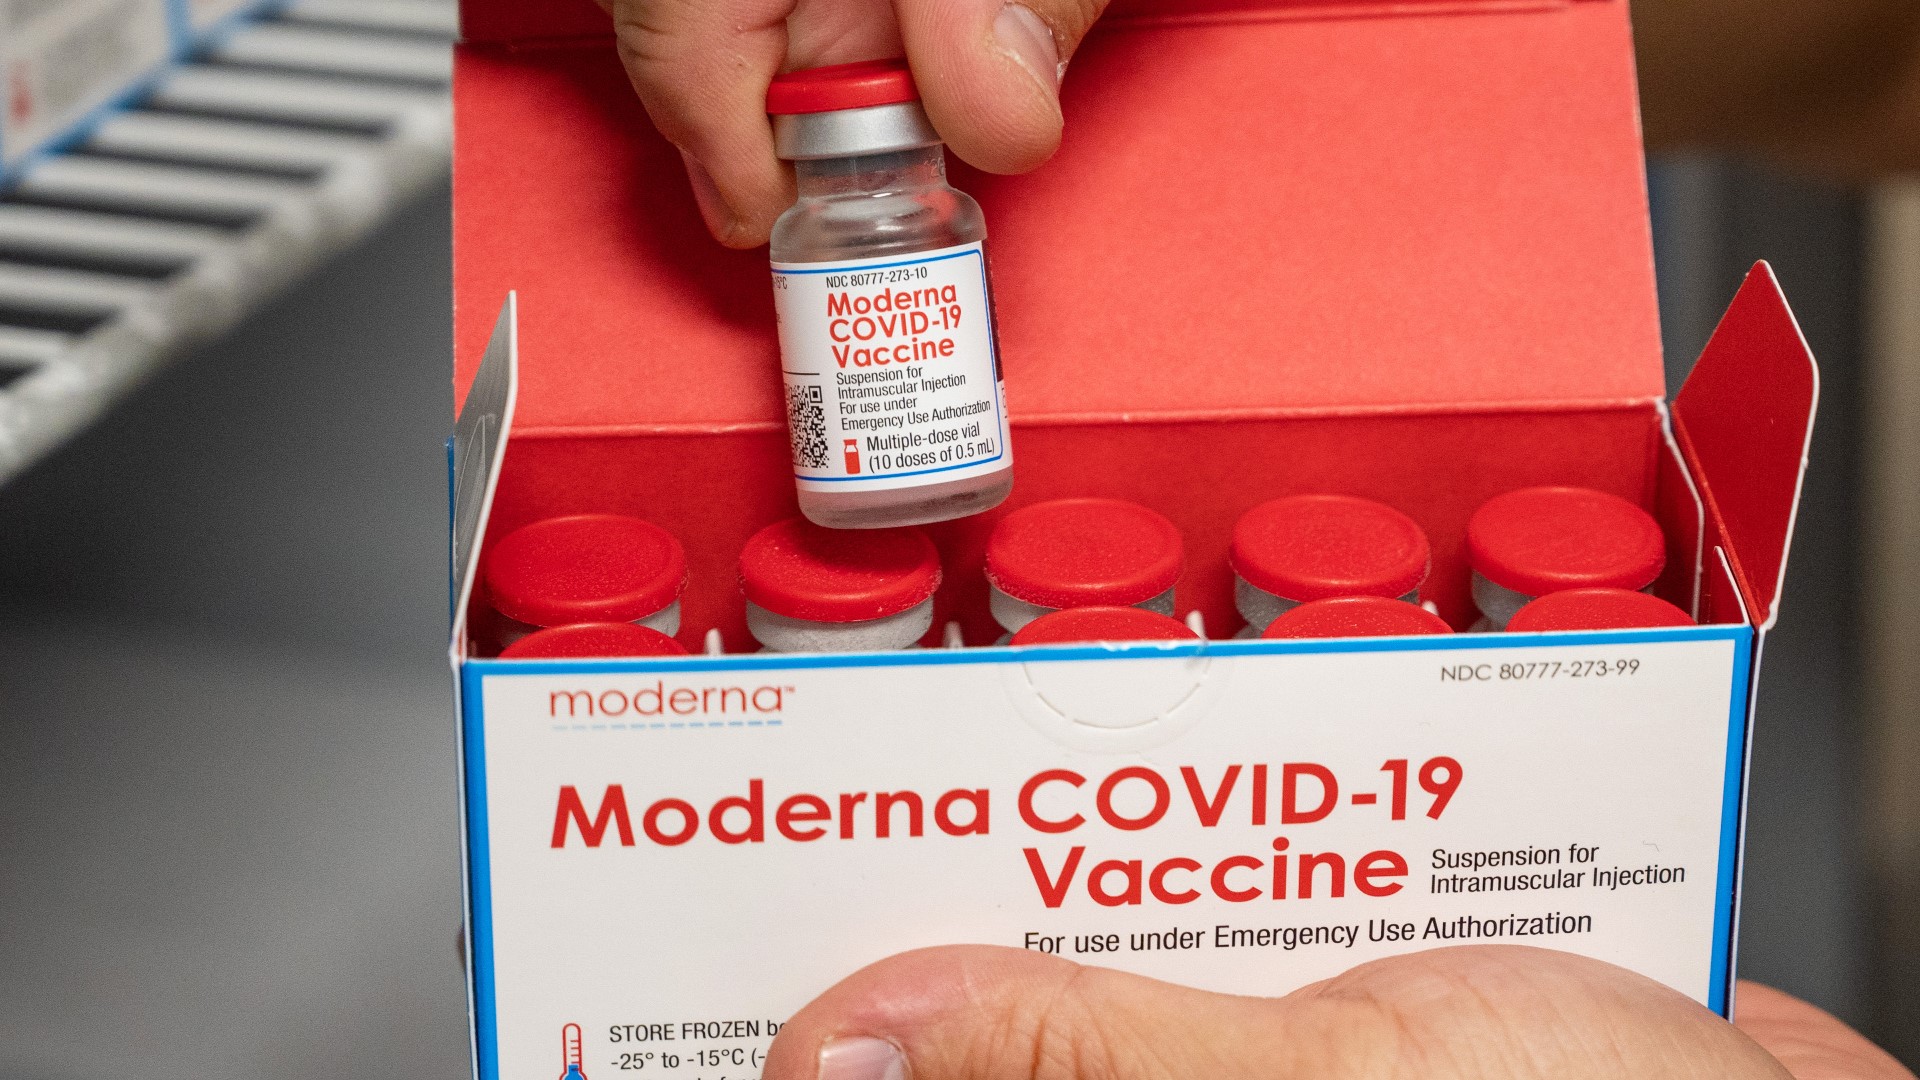 UC Davis Health received the Moderna vaccine this week and one of the main differences is that Moderna does not need the ultra-cold freezers that Pfizer needs.